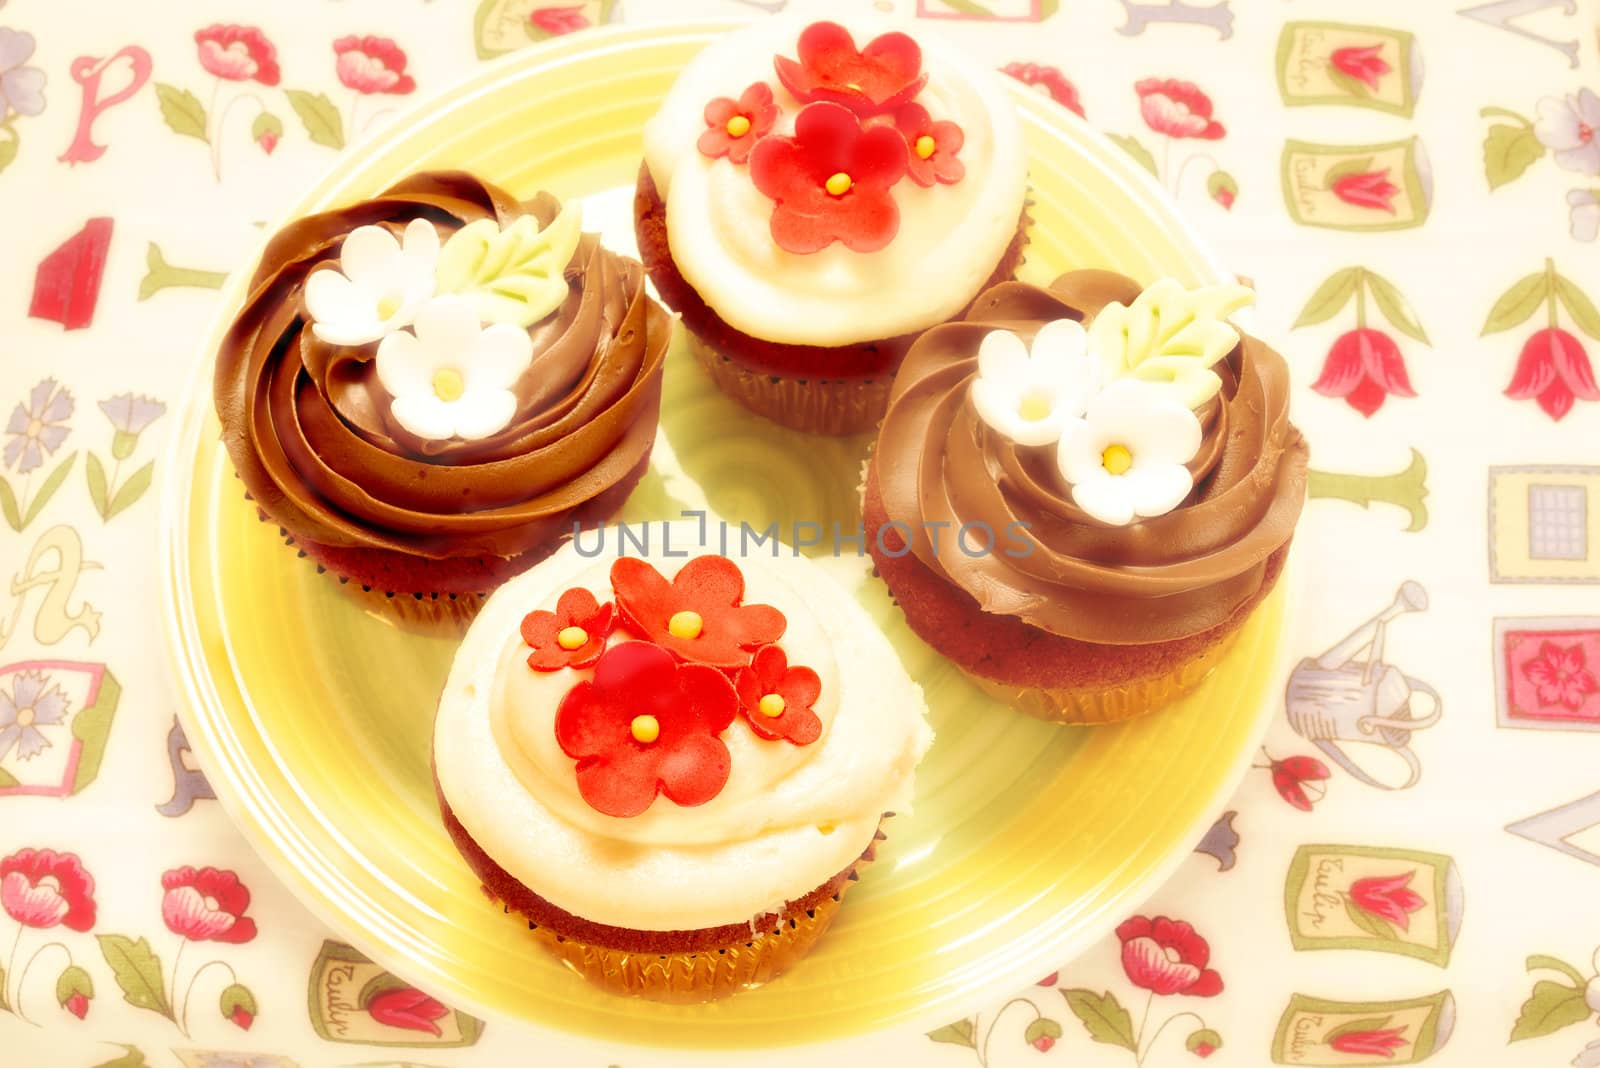 four delicious cupcakes decorated with chocolates and flowers